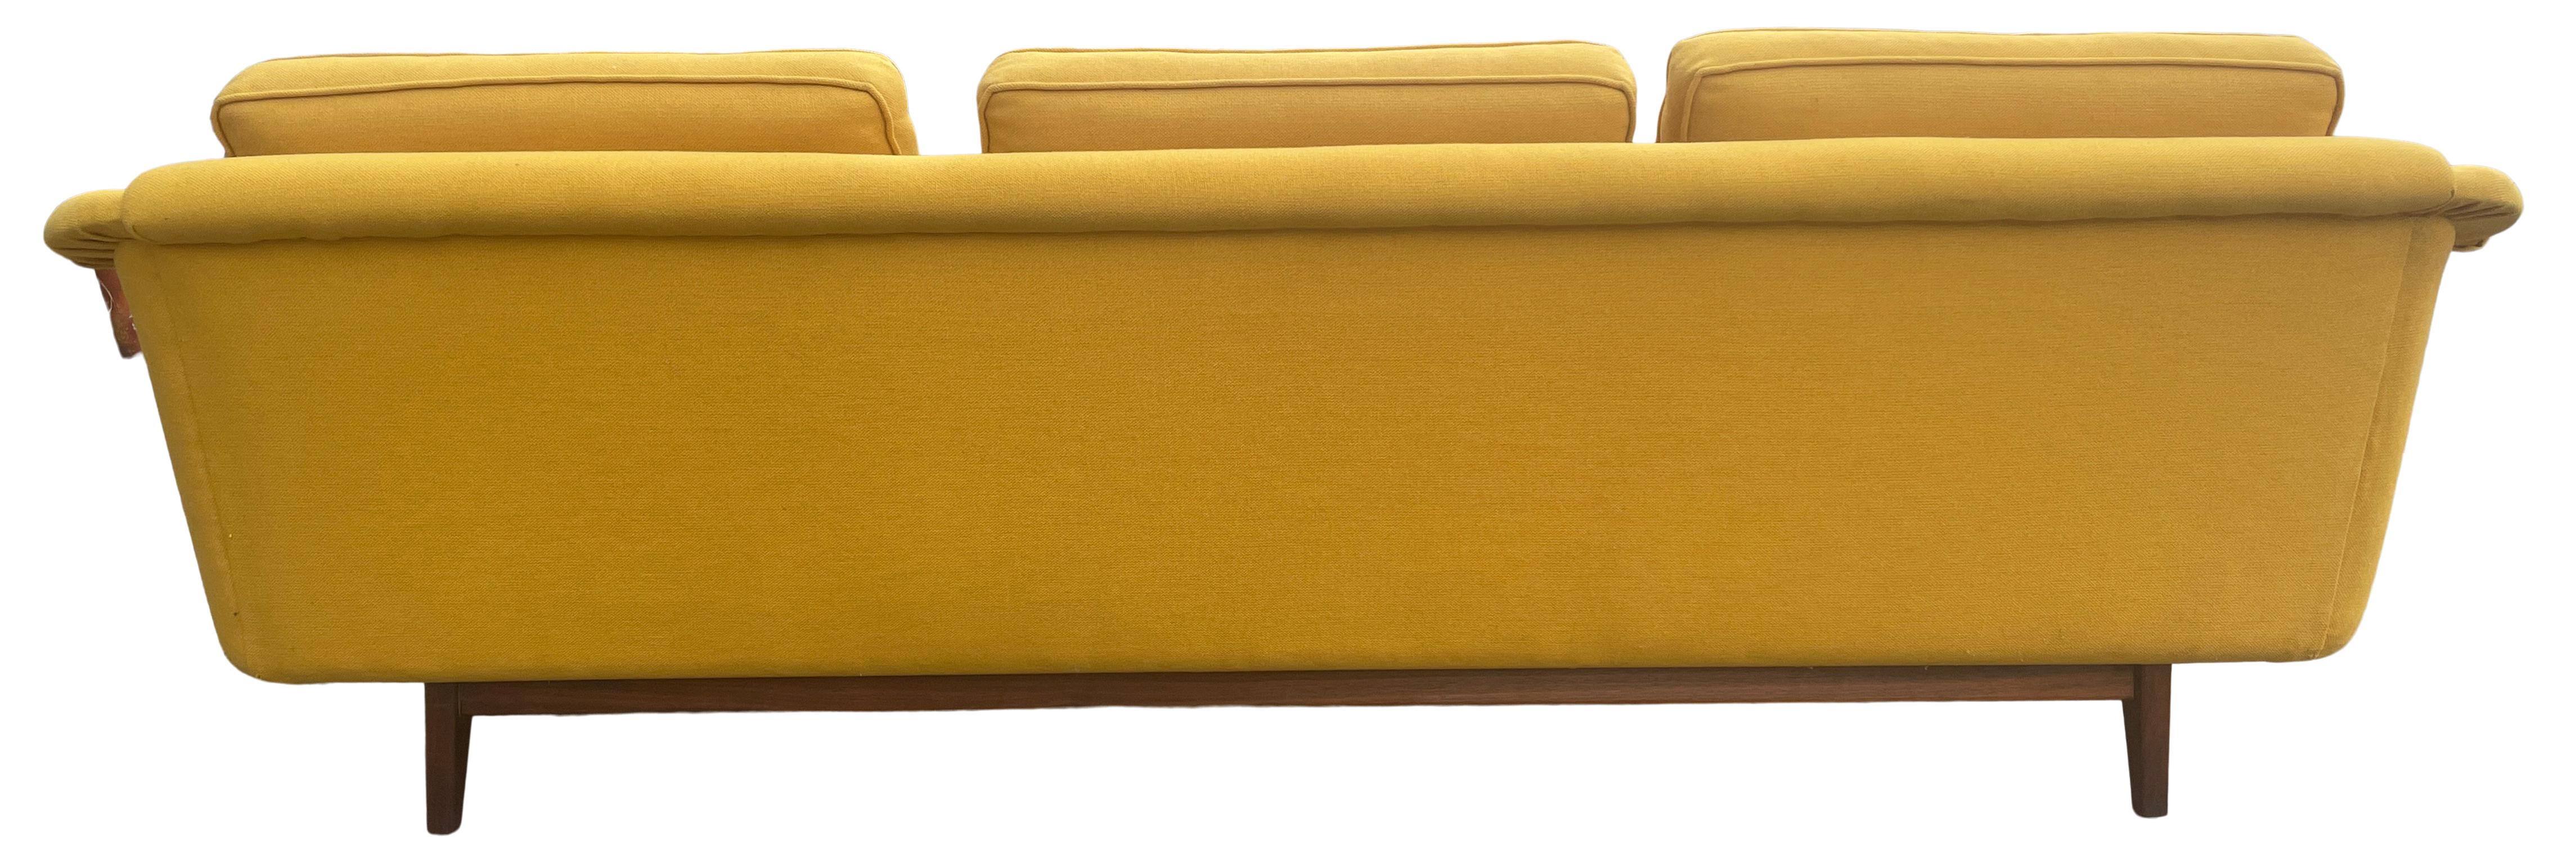 Upholstery Mid-Century Modern Scandinavian 3 Seat Mustard Sofa Couch by DUX